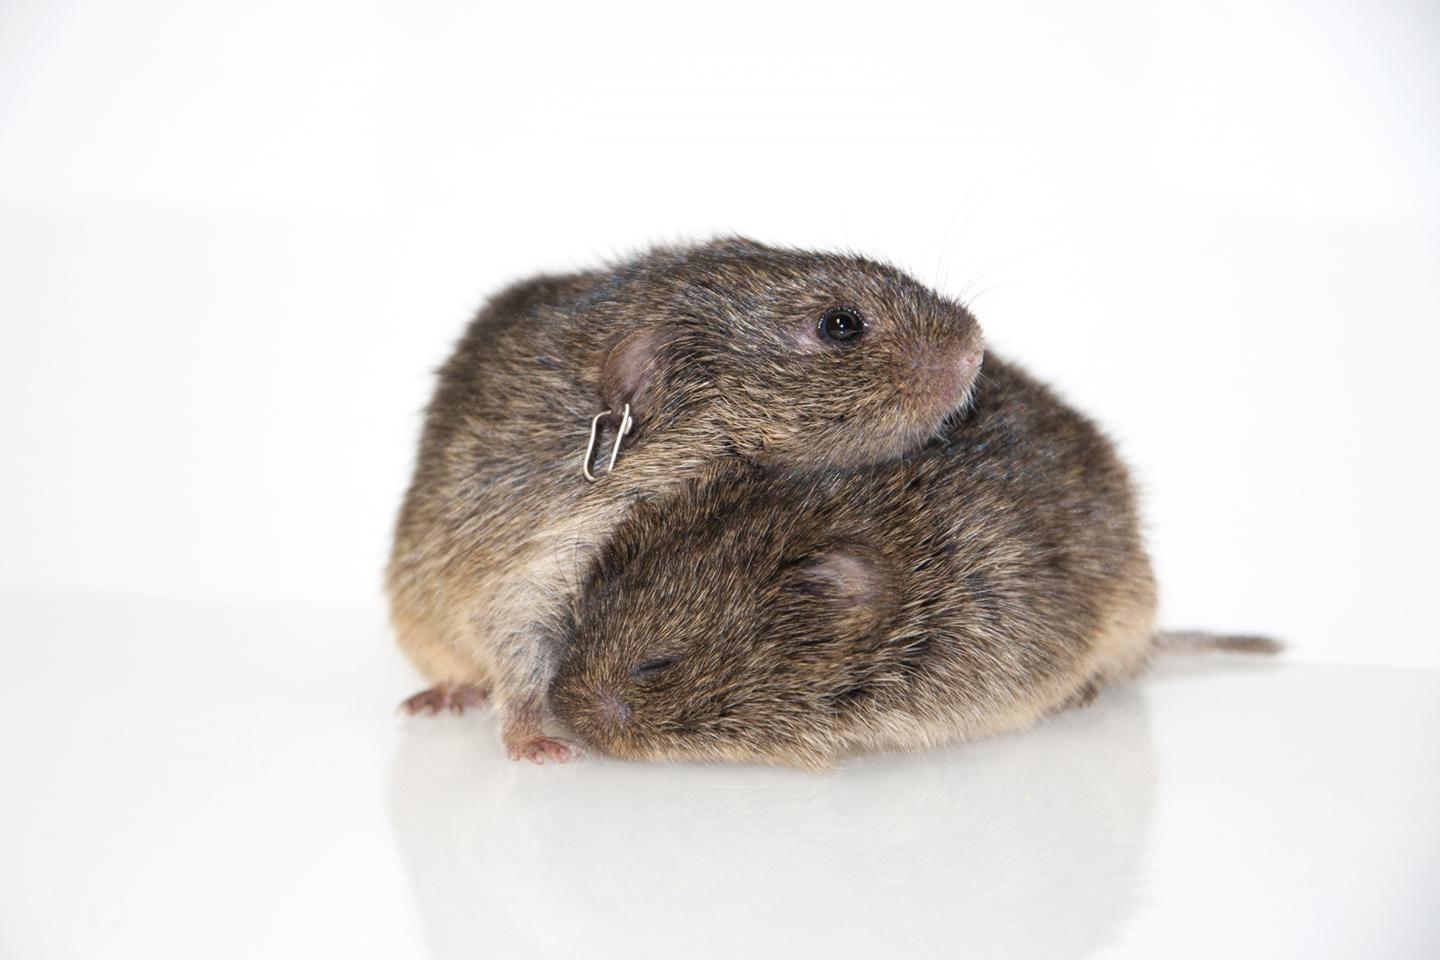 A pair of voles, one with an ear tag that is used as a unique identifier for the vole. Credit: Aubrey Kelly/Cornell University